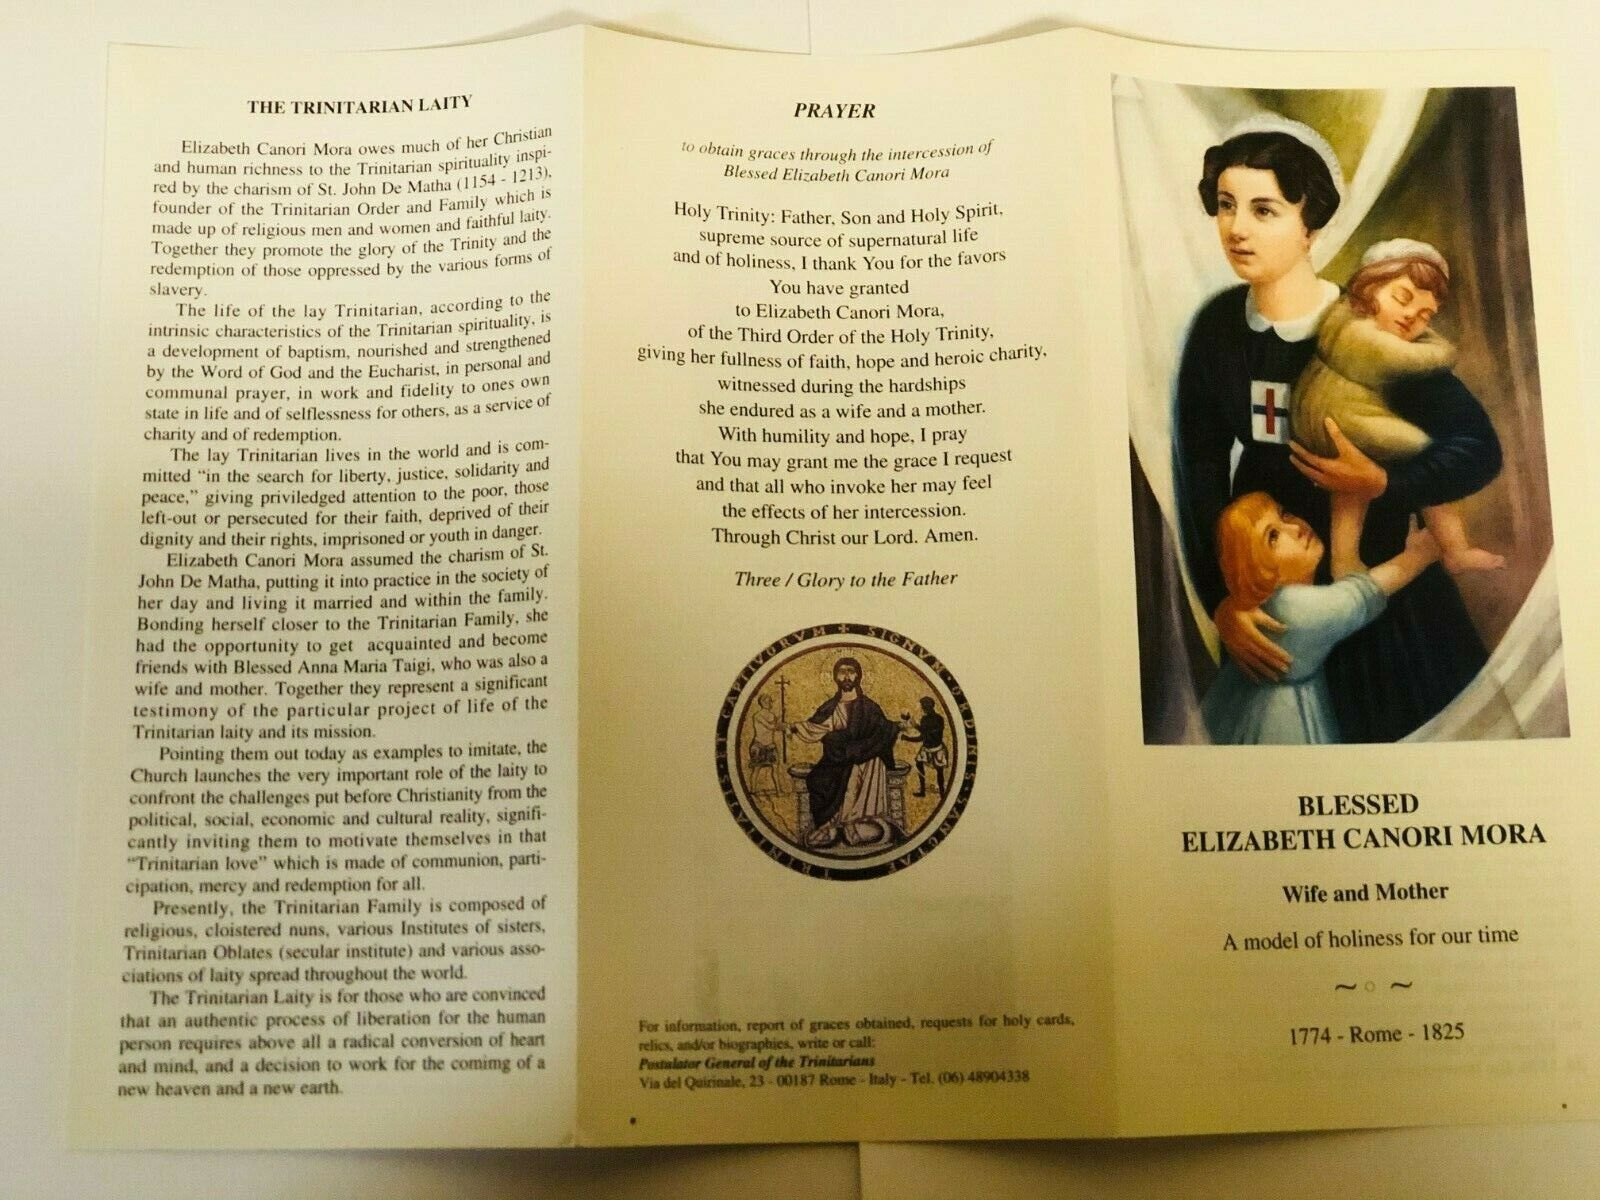 Blessed Elizabeth Canori Mora Biography + Prayer Card, New from Italy - Bob and Penny Lord